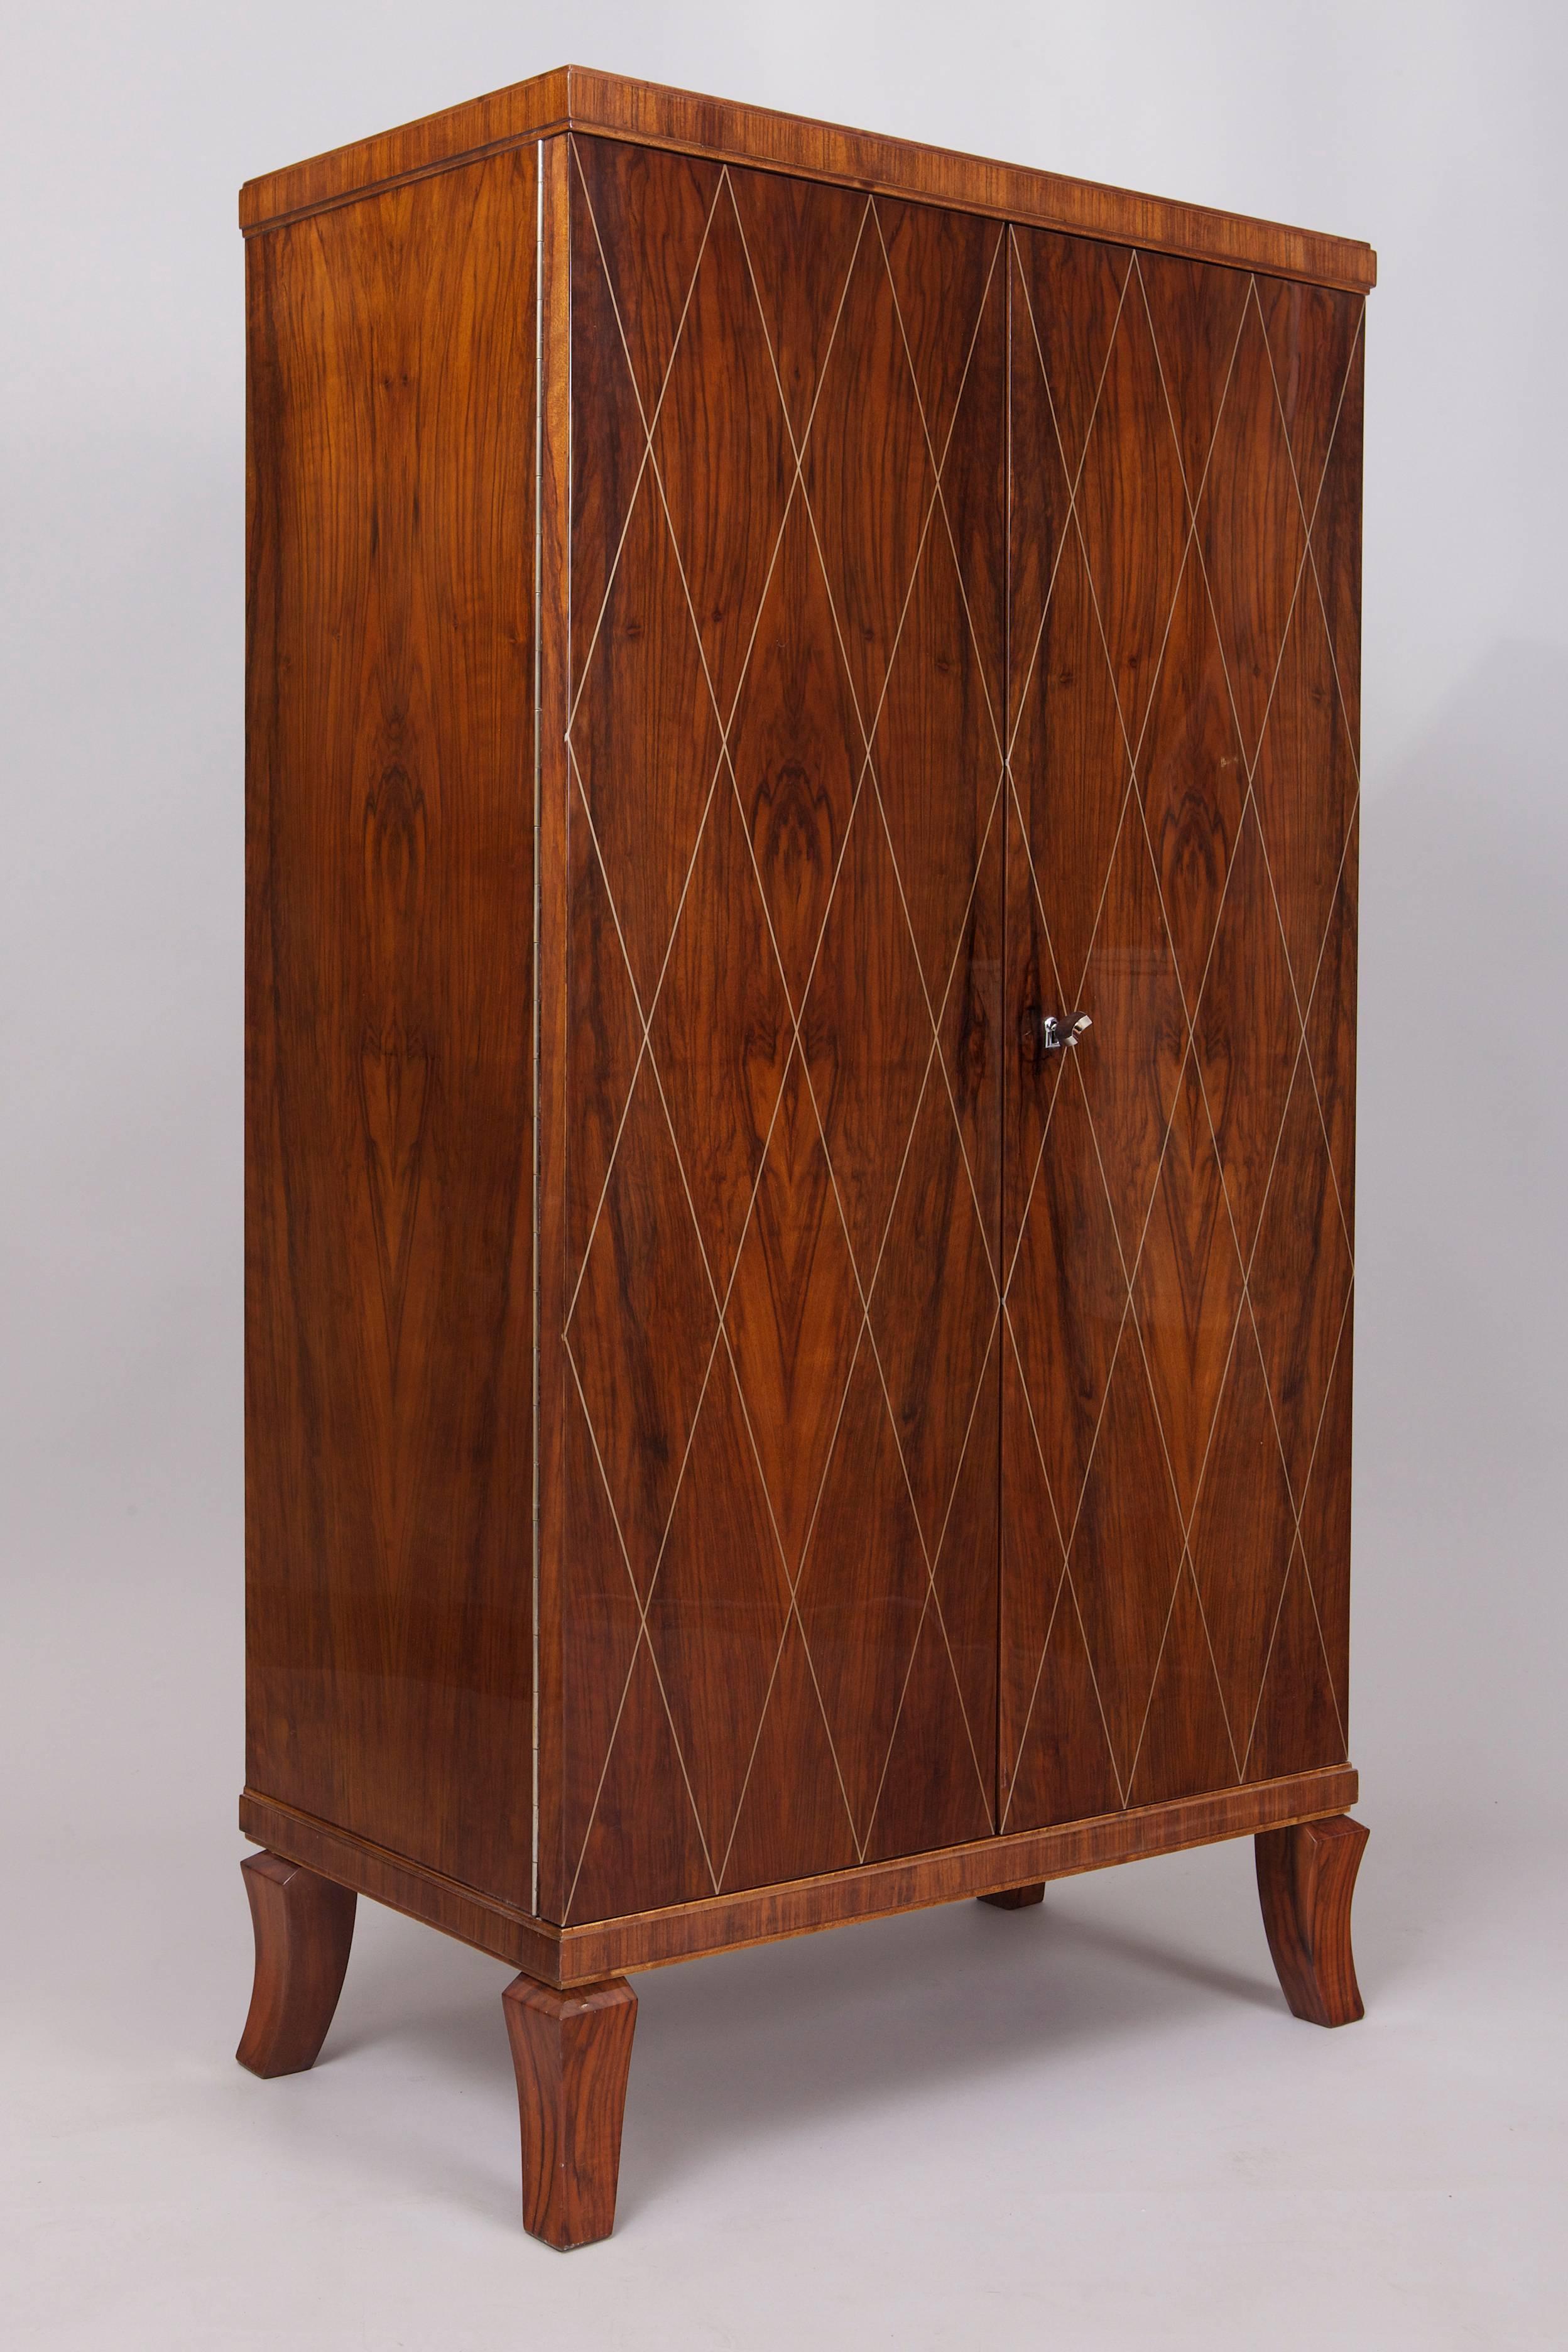 Frech Art Deco bar (cabinet).
Bar cabinet basis of the draft of Jacques-Émile Ruhlmann. Walnut veneer decorated by inlaid silver lines.
Completely restored, surface was made by piano lacquers to the high gloss. 
New inside lighting - turn on when